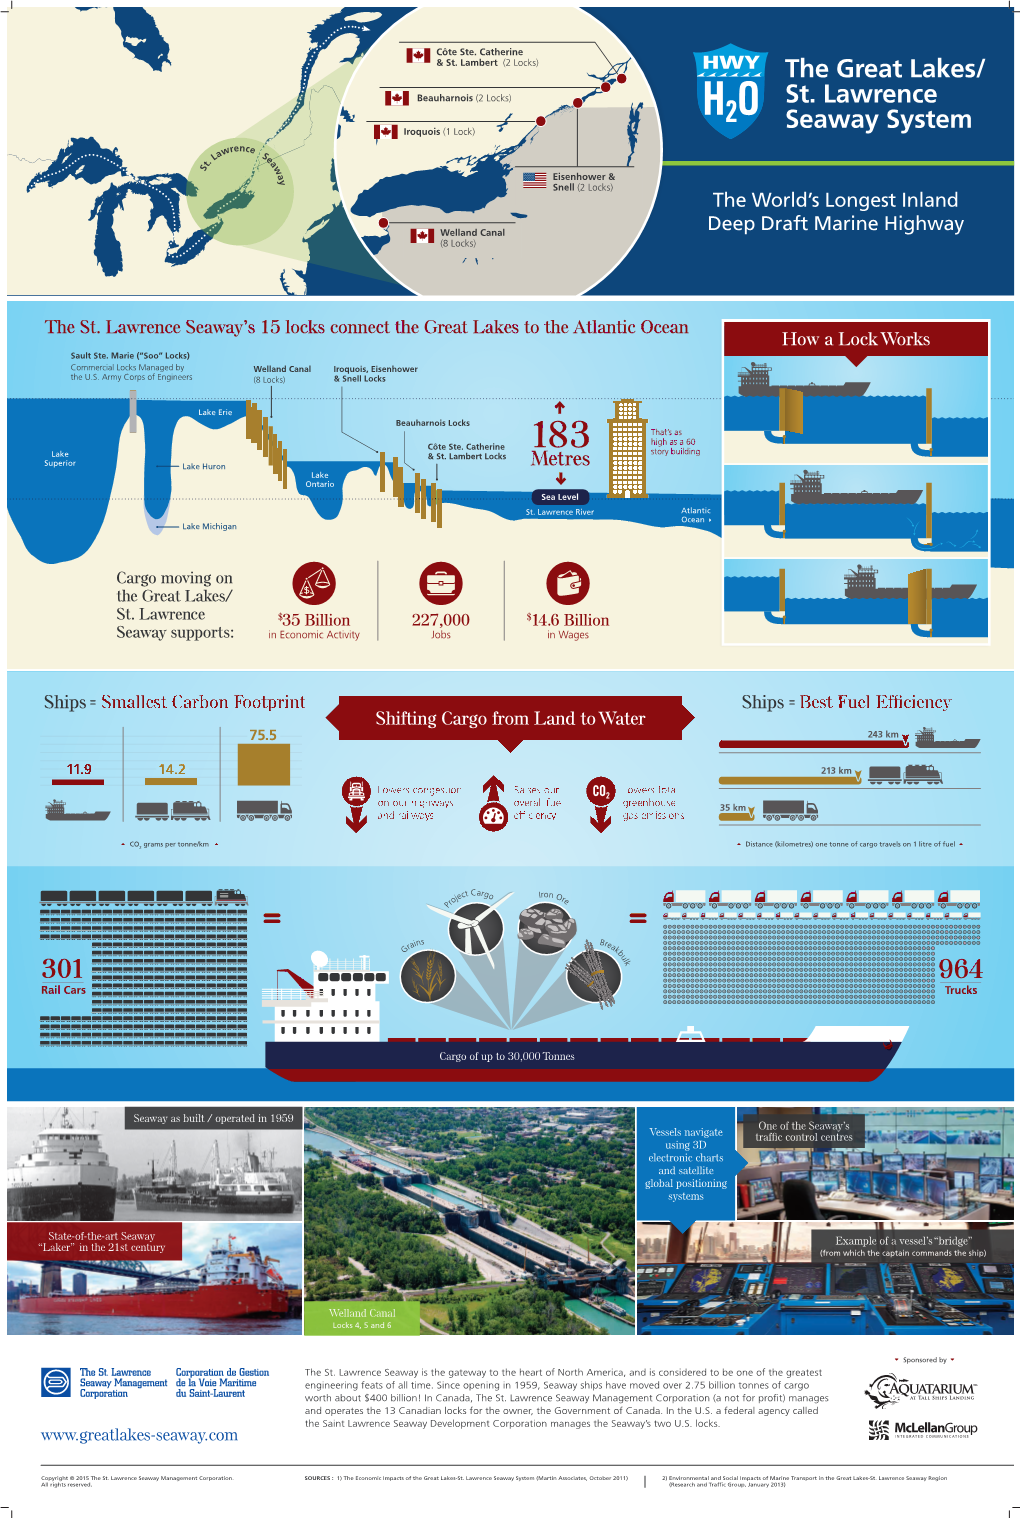 St. Lawrence Seaway System 301